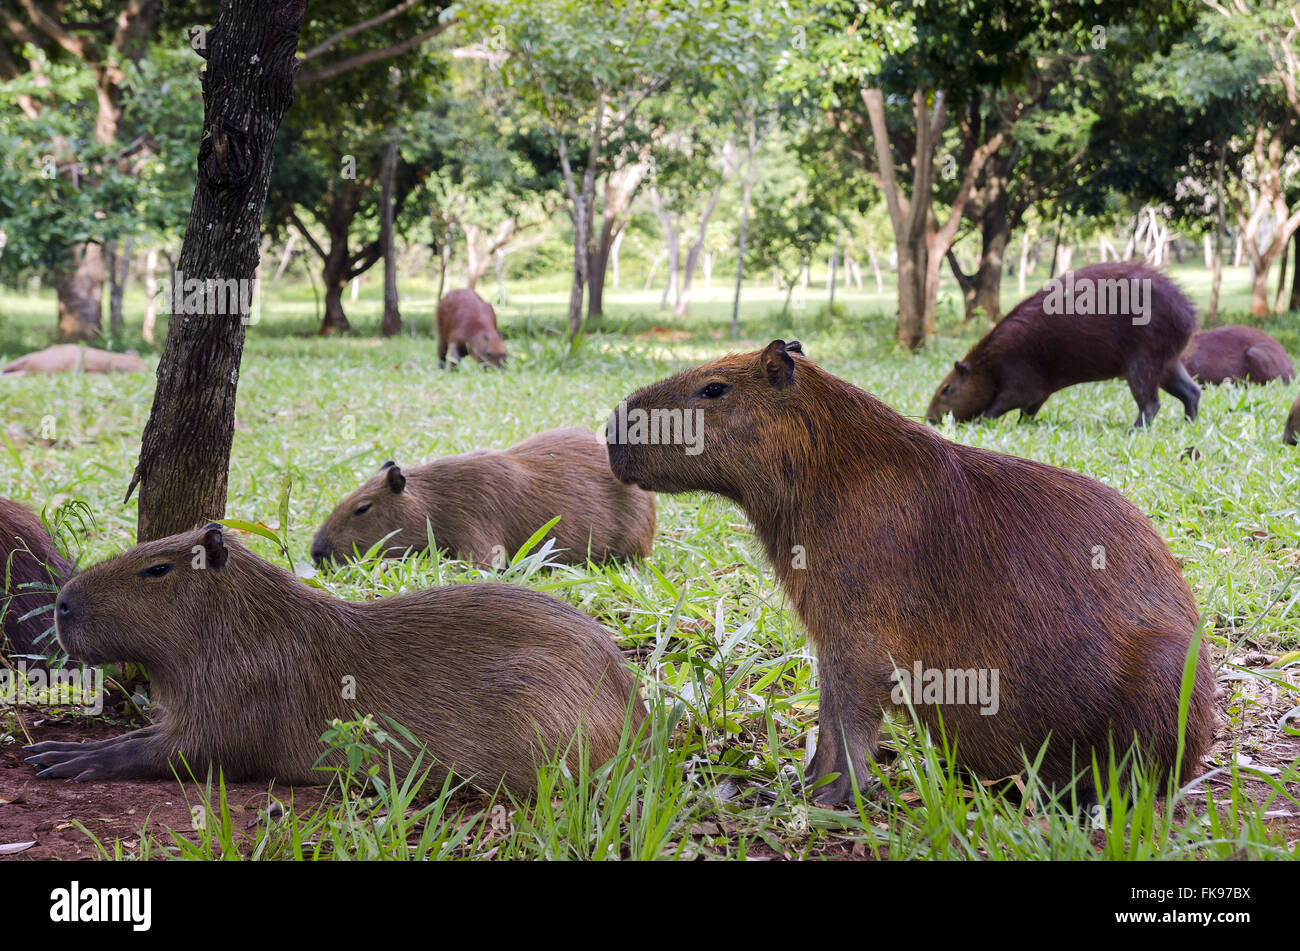 Capybaras in the Indigenous Nations Park Stock Photo